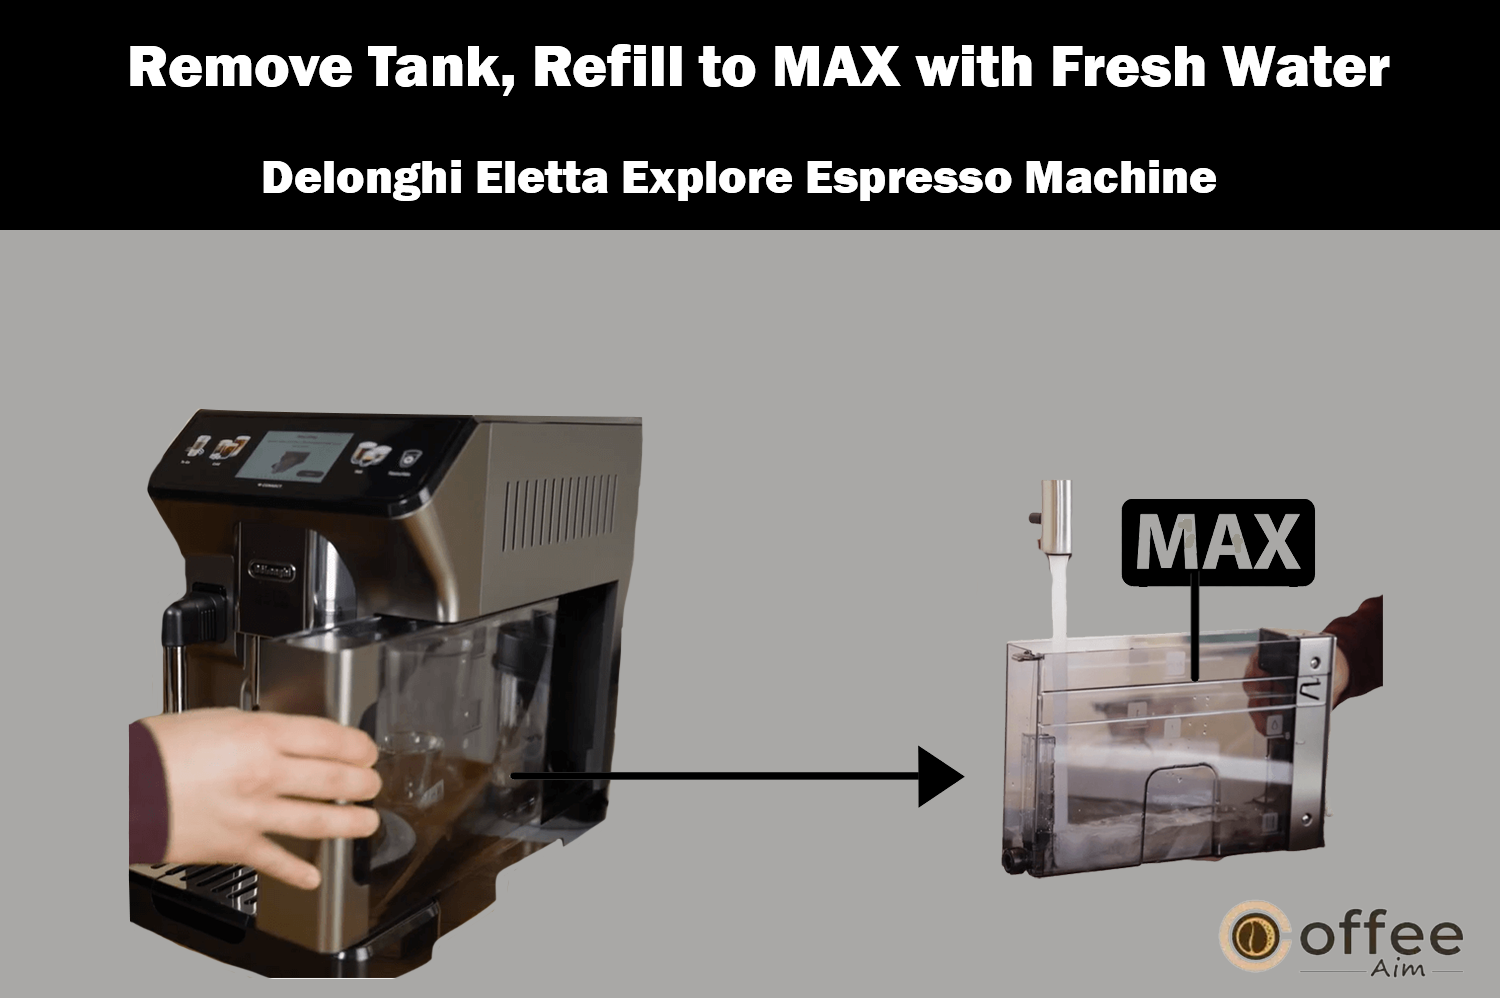 This image illustrates the process of removing the water tank and filling it with fresh water up to the MAX line for the Delonghi Eletta Explore Espresso Machine, as outlined in the article "How to Use the Delonghi Eletta Explore Espresso Machine."